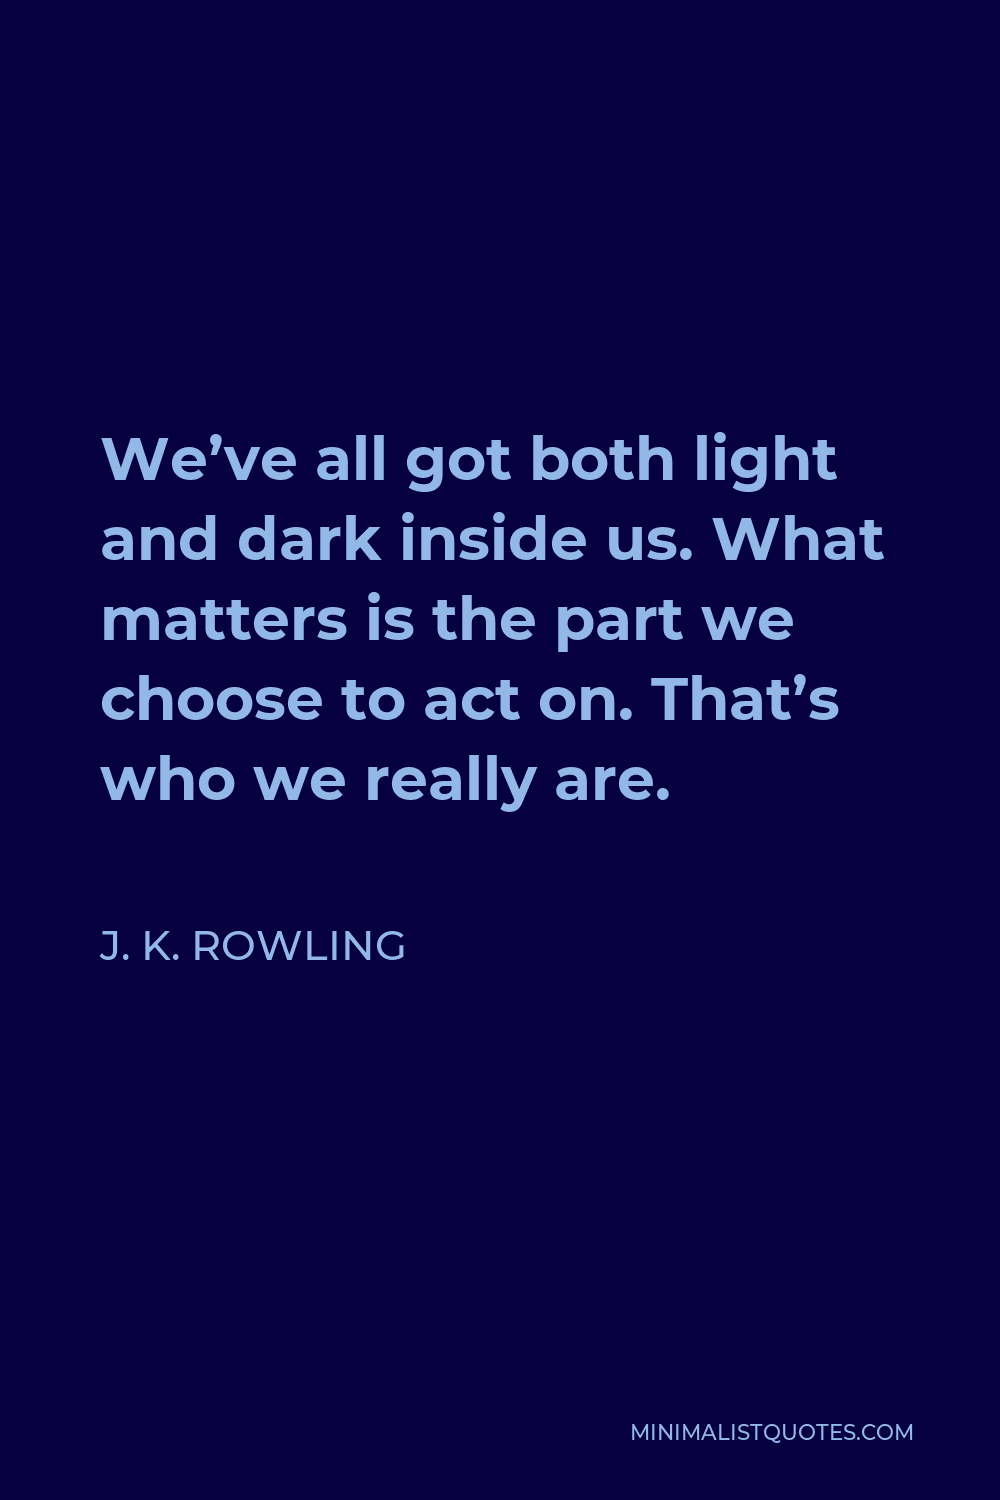 J. K. Rowling Quote - We’ve all got both light and dark inside us. What matters is the part we choose to act on. That’s who we really are.